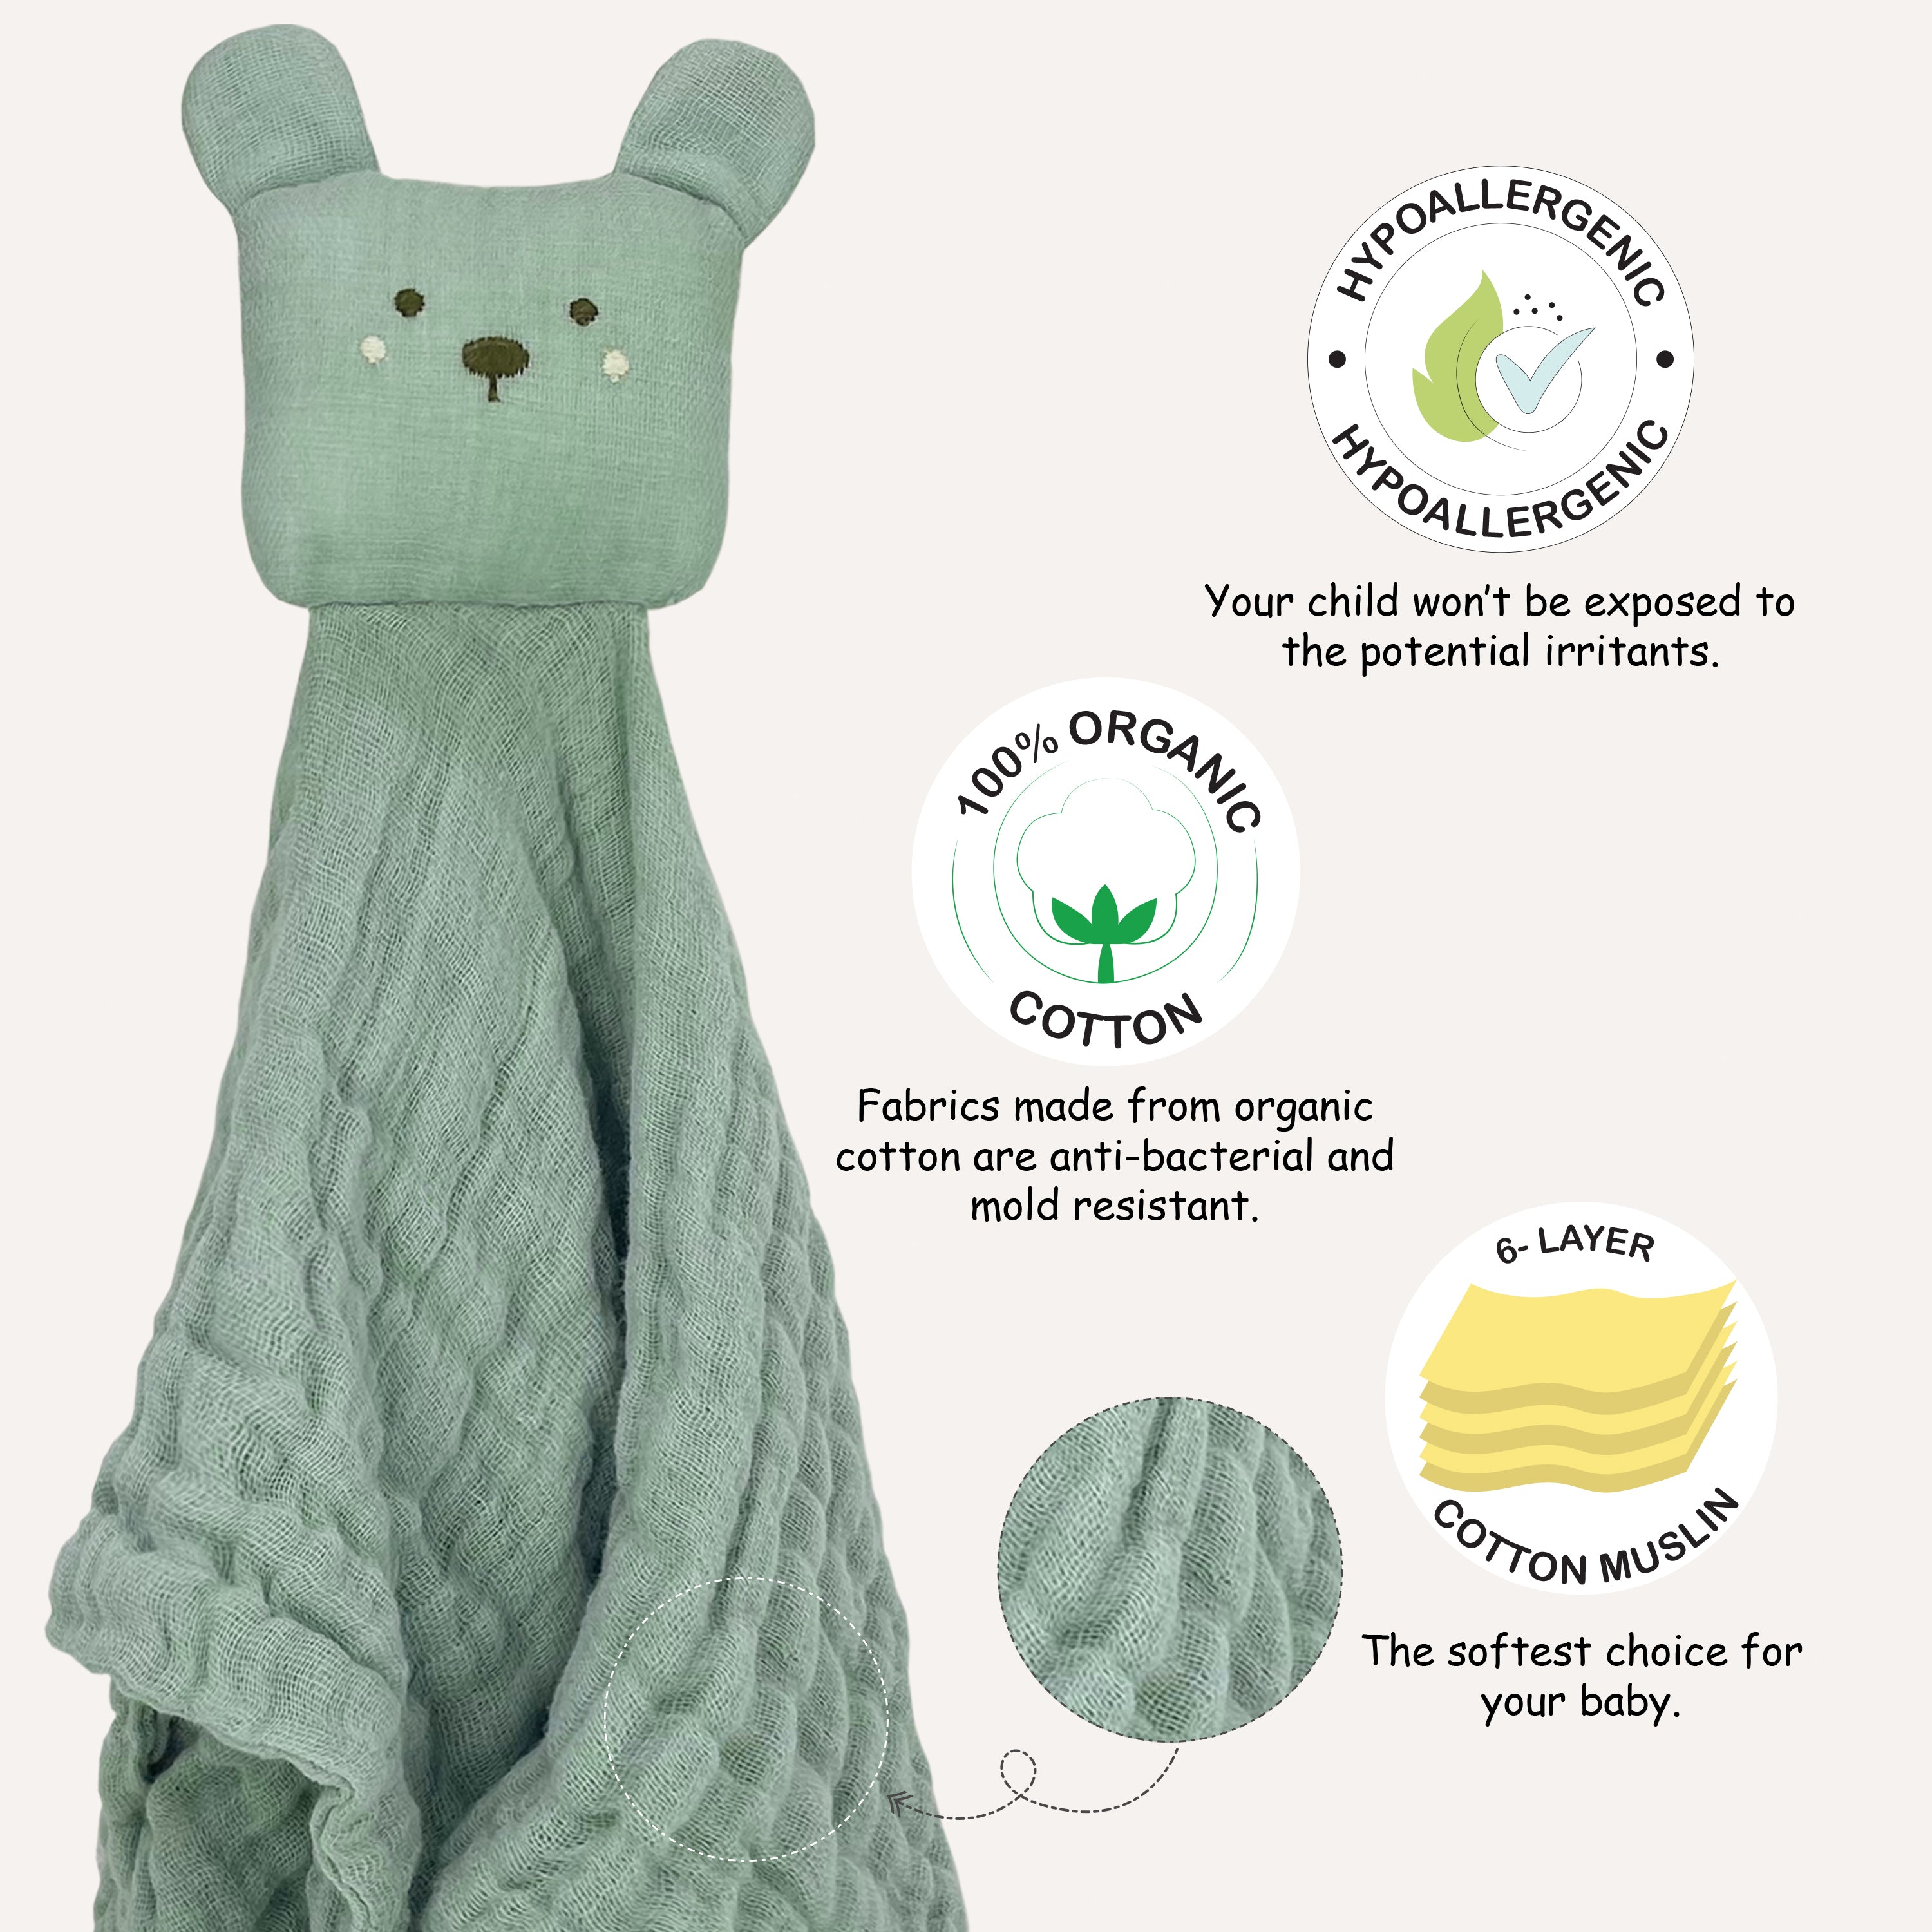 Abracadabra Organics Collectible Security Blanket With Cuddle Toy - Bear